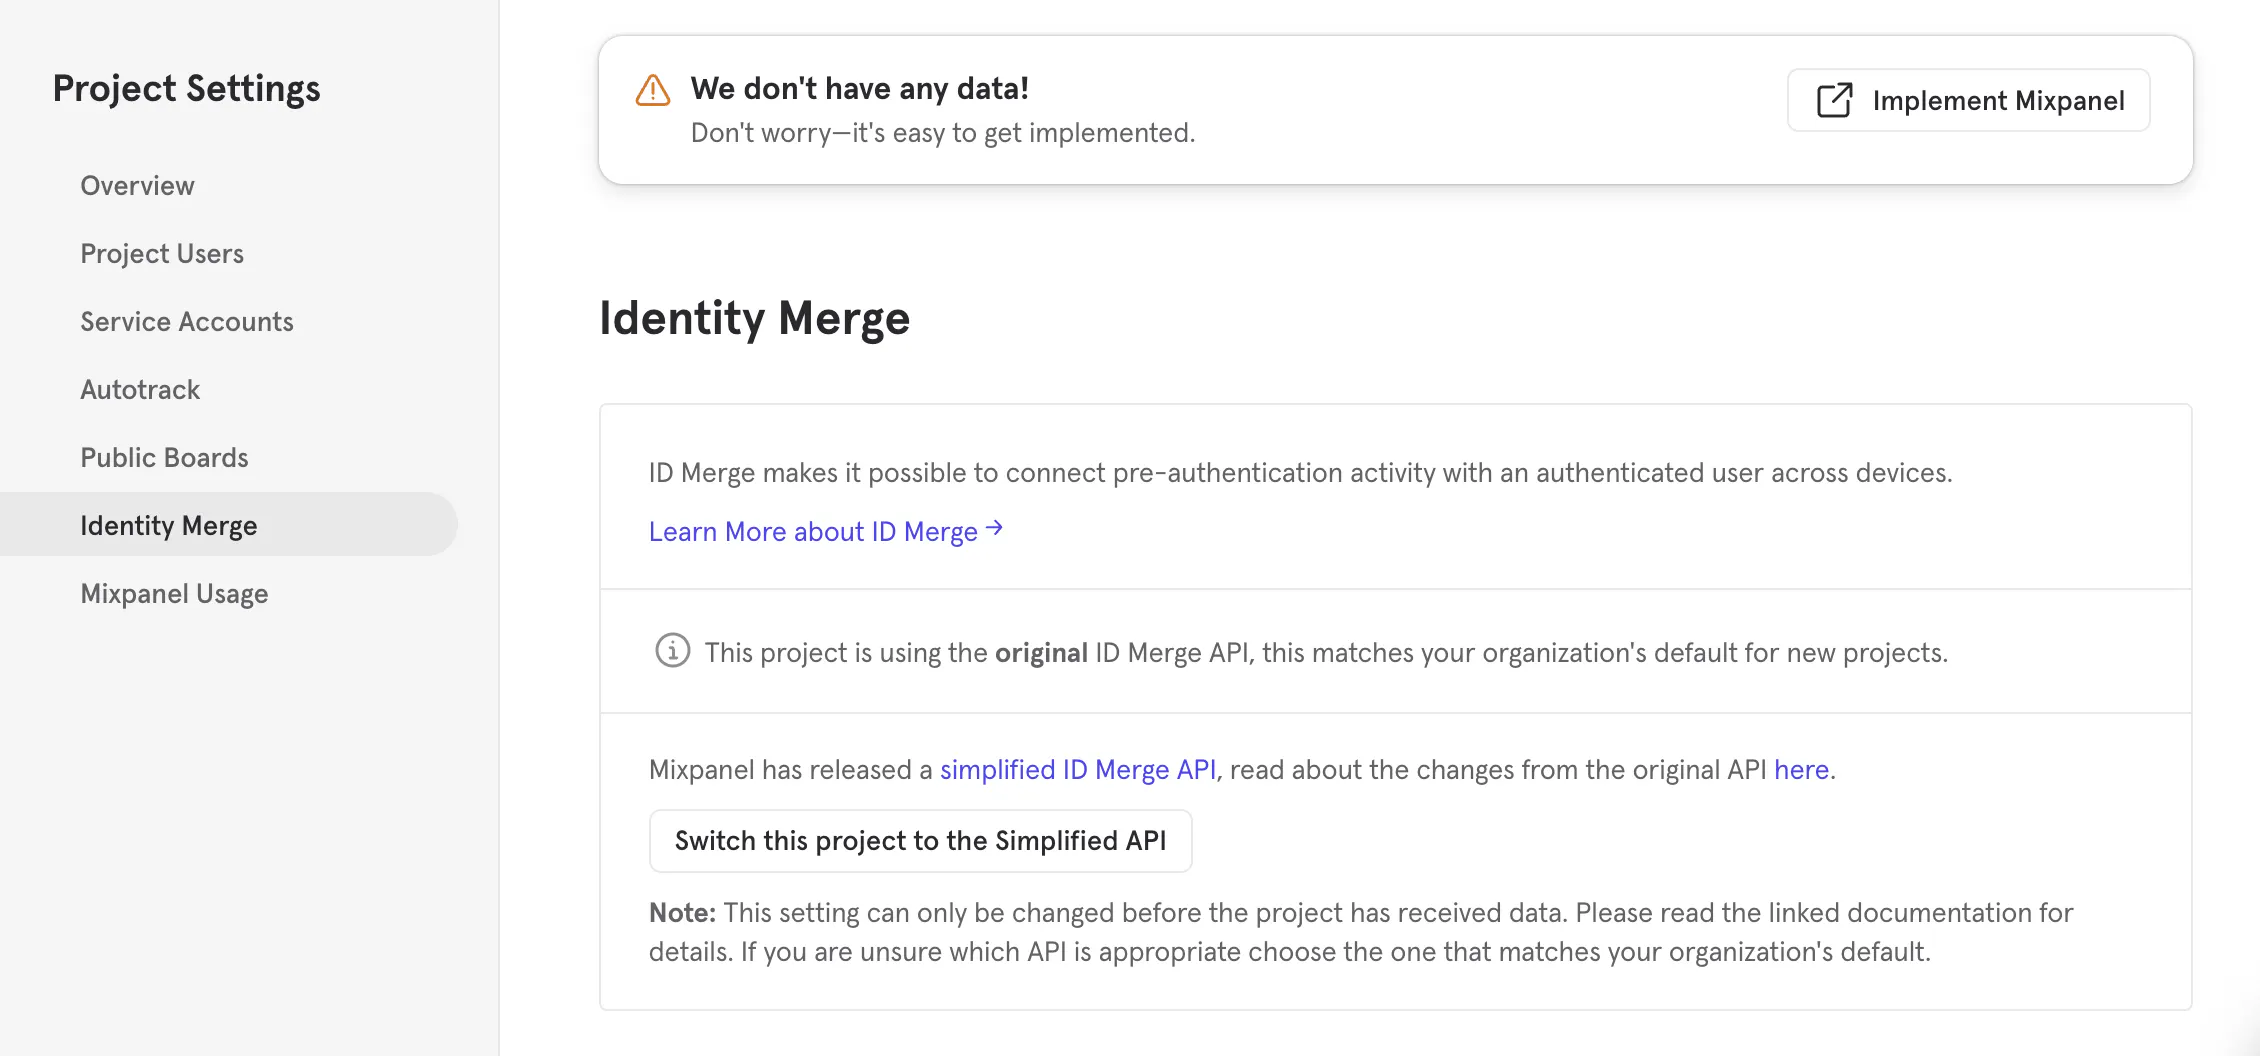 mixpanel's interface has an identity merge setting that supports a simple API